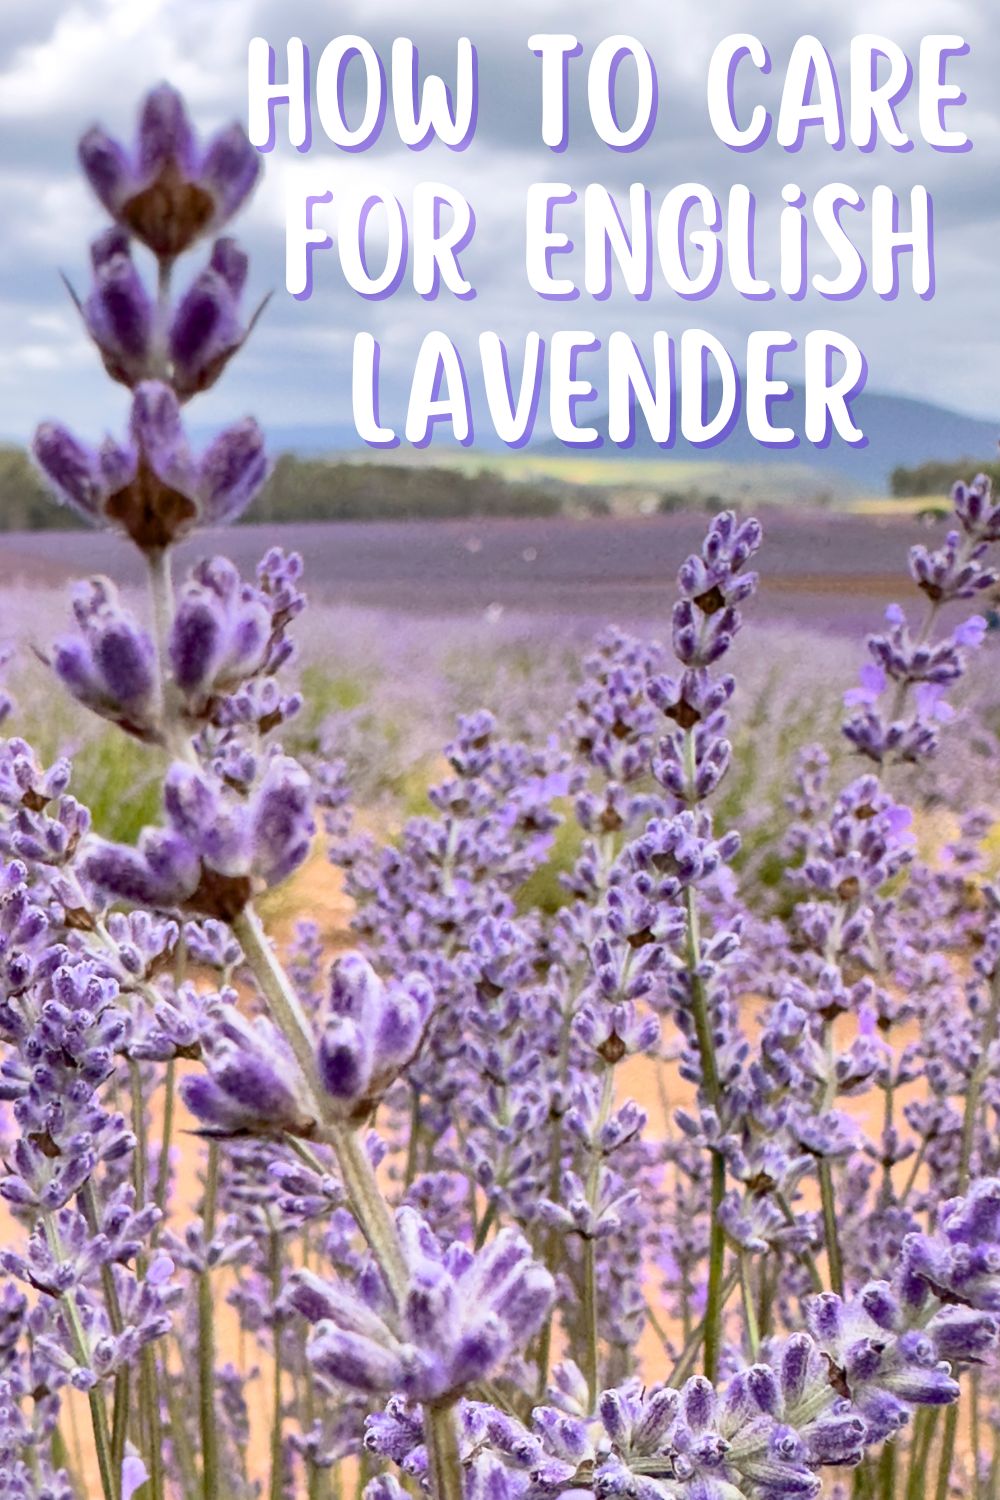 How to Care for English Lavender.